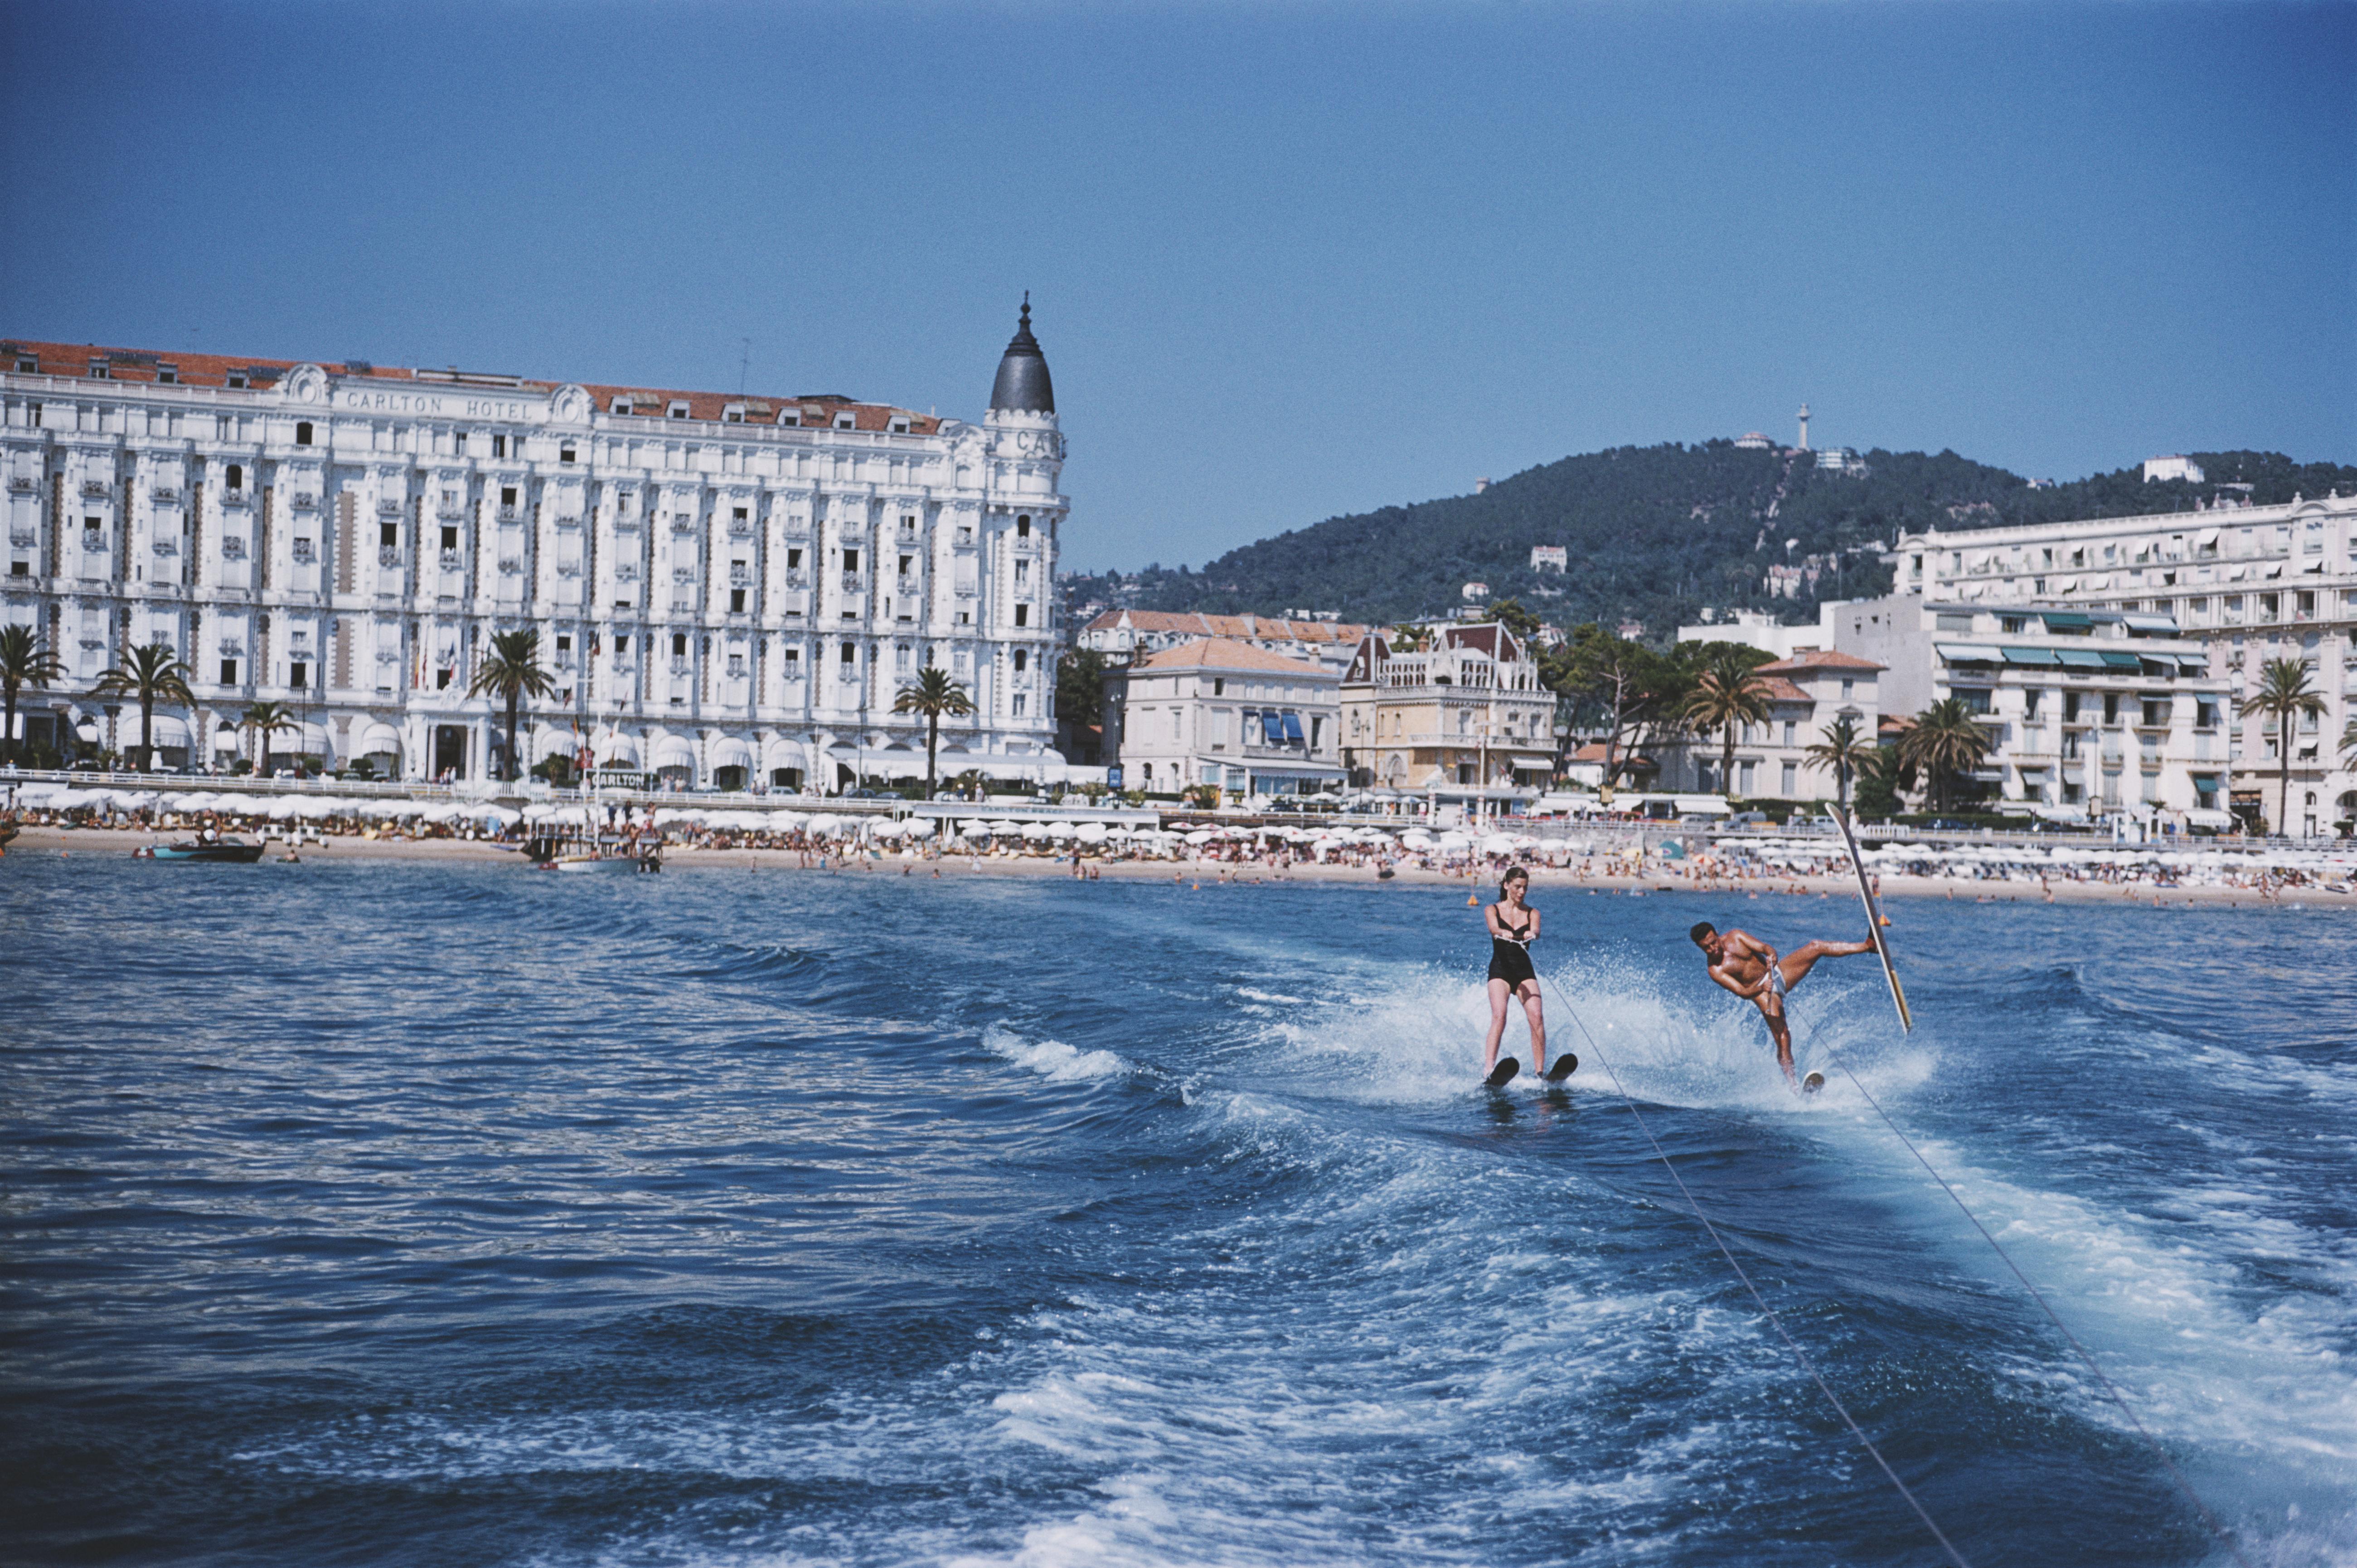 'Cannes Watersports' 1958 Slim Aarons Limited Estate Edition

Holidaymakers waterskiing in front of the Carlton Hotel, Cannes, 1958. 

Produced from the original transparency
Certificate of authenticity supplied 
30x40 inches / 76 x 102 cm paper